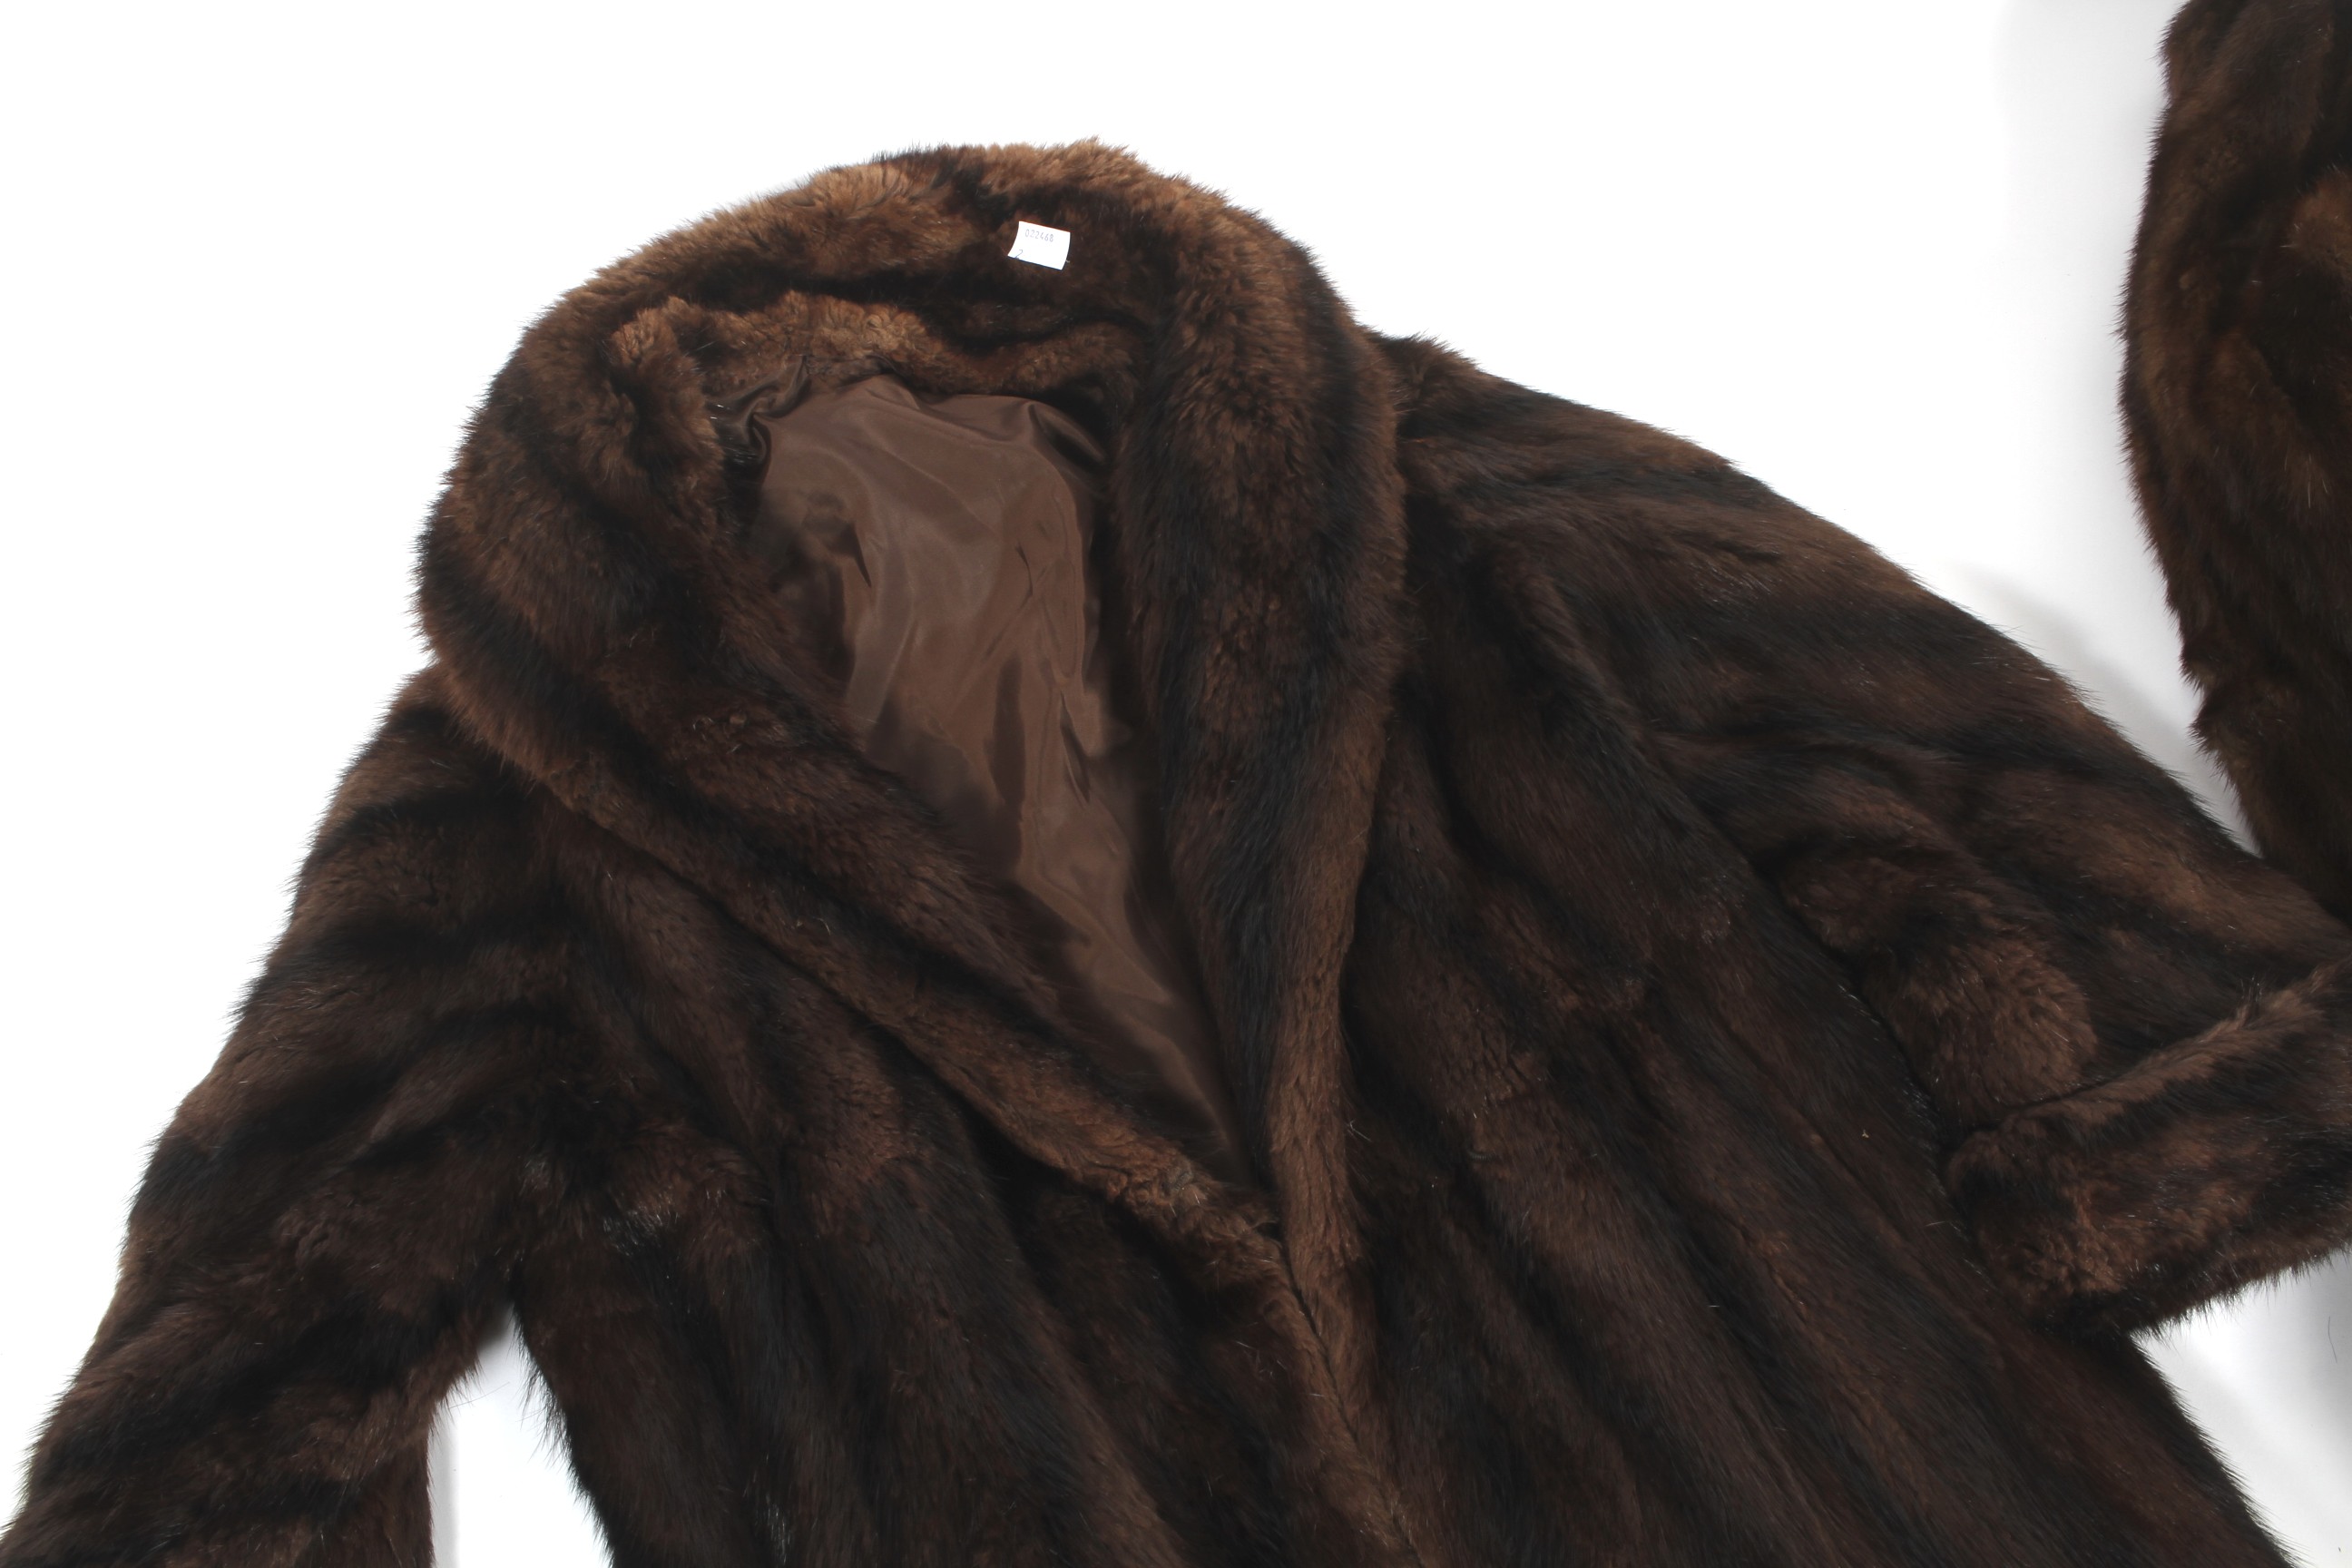 Two ladies mink coats and a mink stole, circa 1960s. - Image 2 of 3